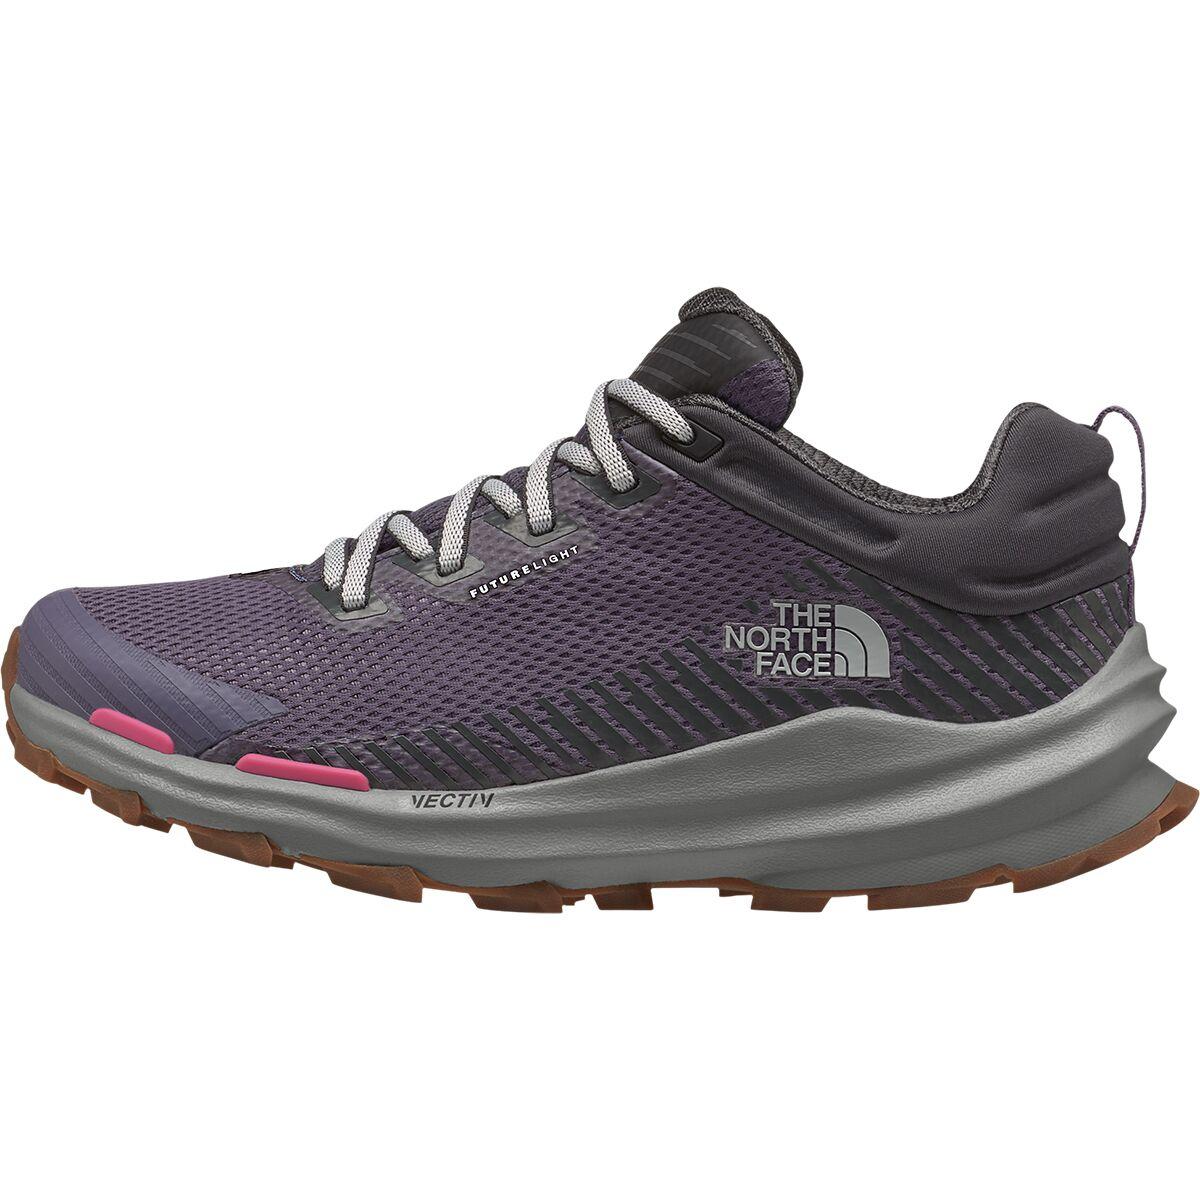 The North Face Vectiv Fastpack Futurelight Hiking Shoe | Lyst